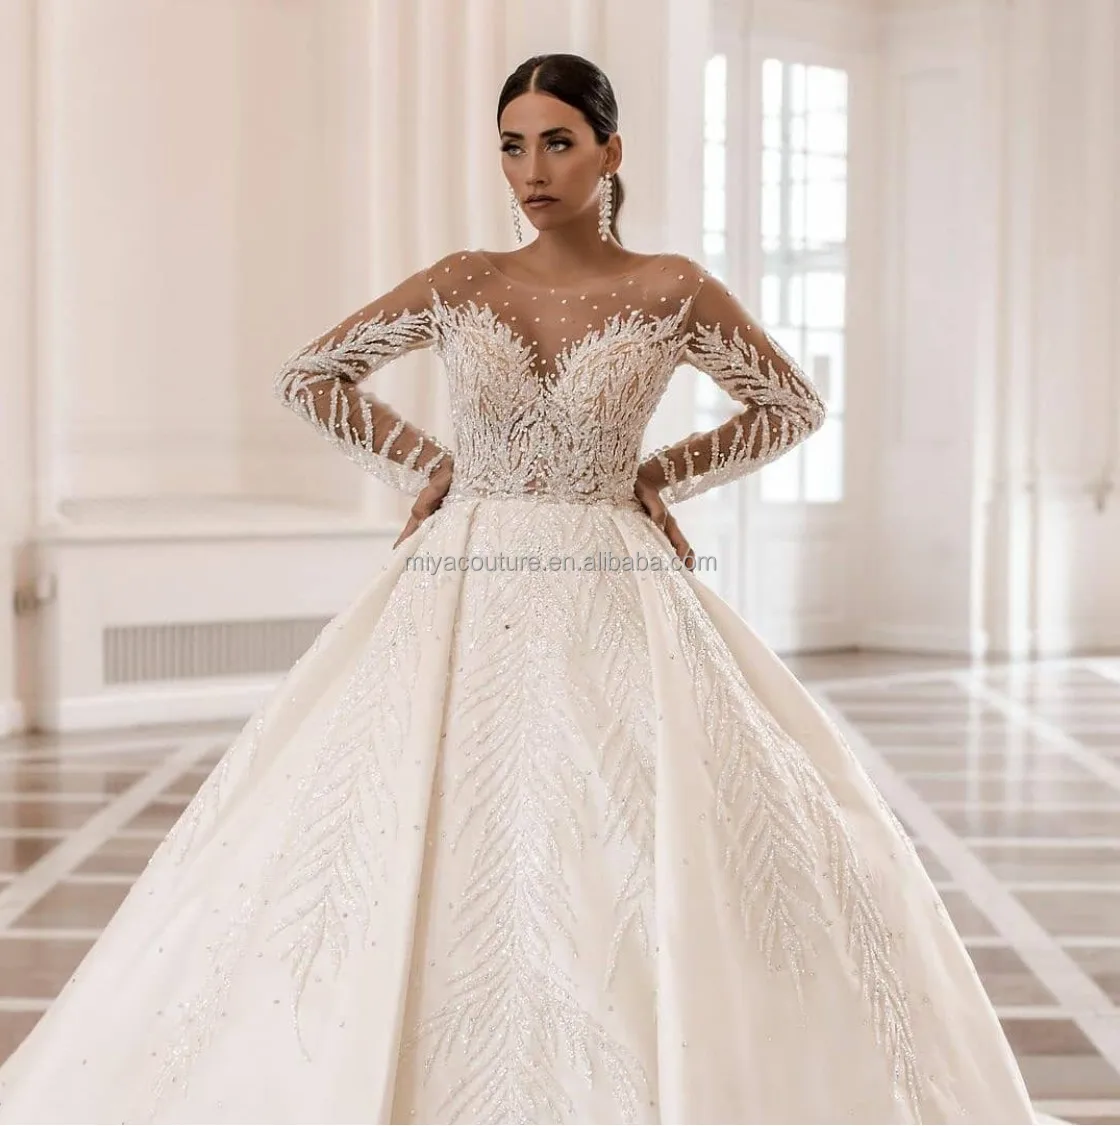 New Arrival Heavy-beaded Crystal Ball Gown Luxury Wedding Dresses Long ...